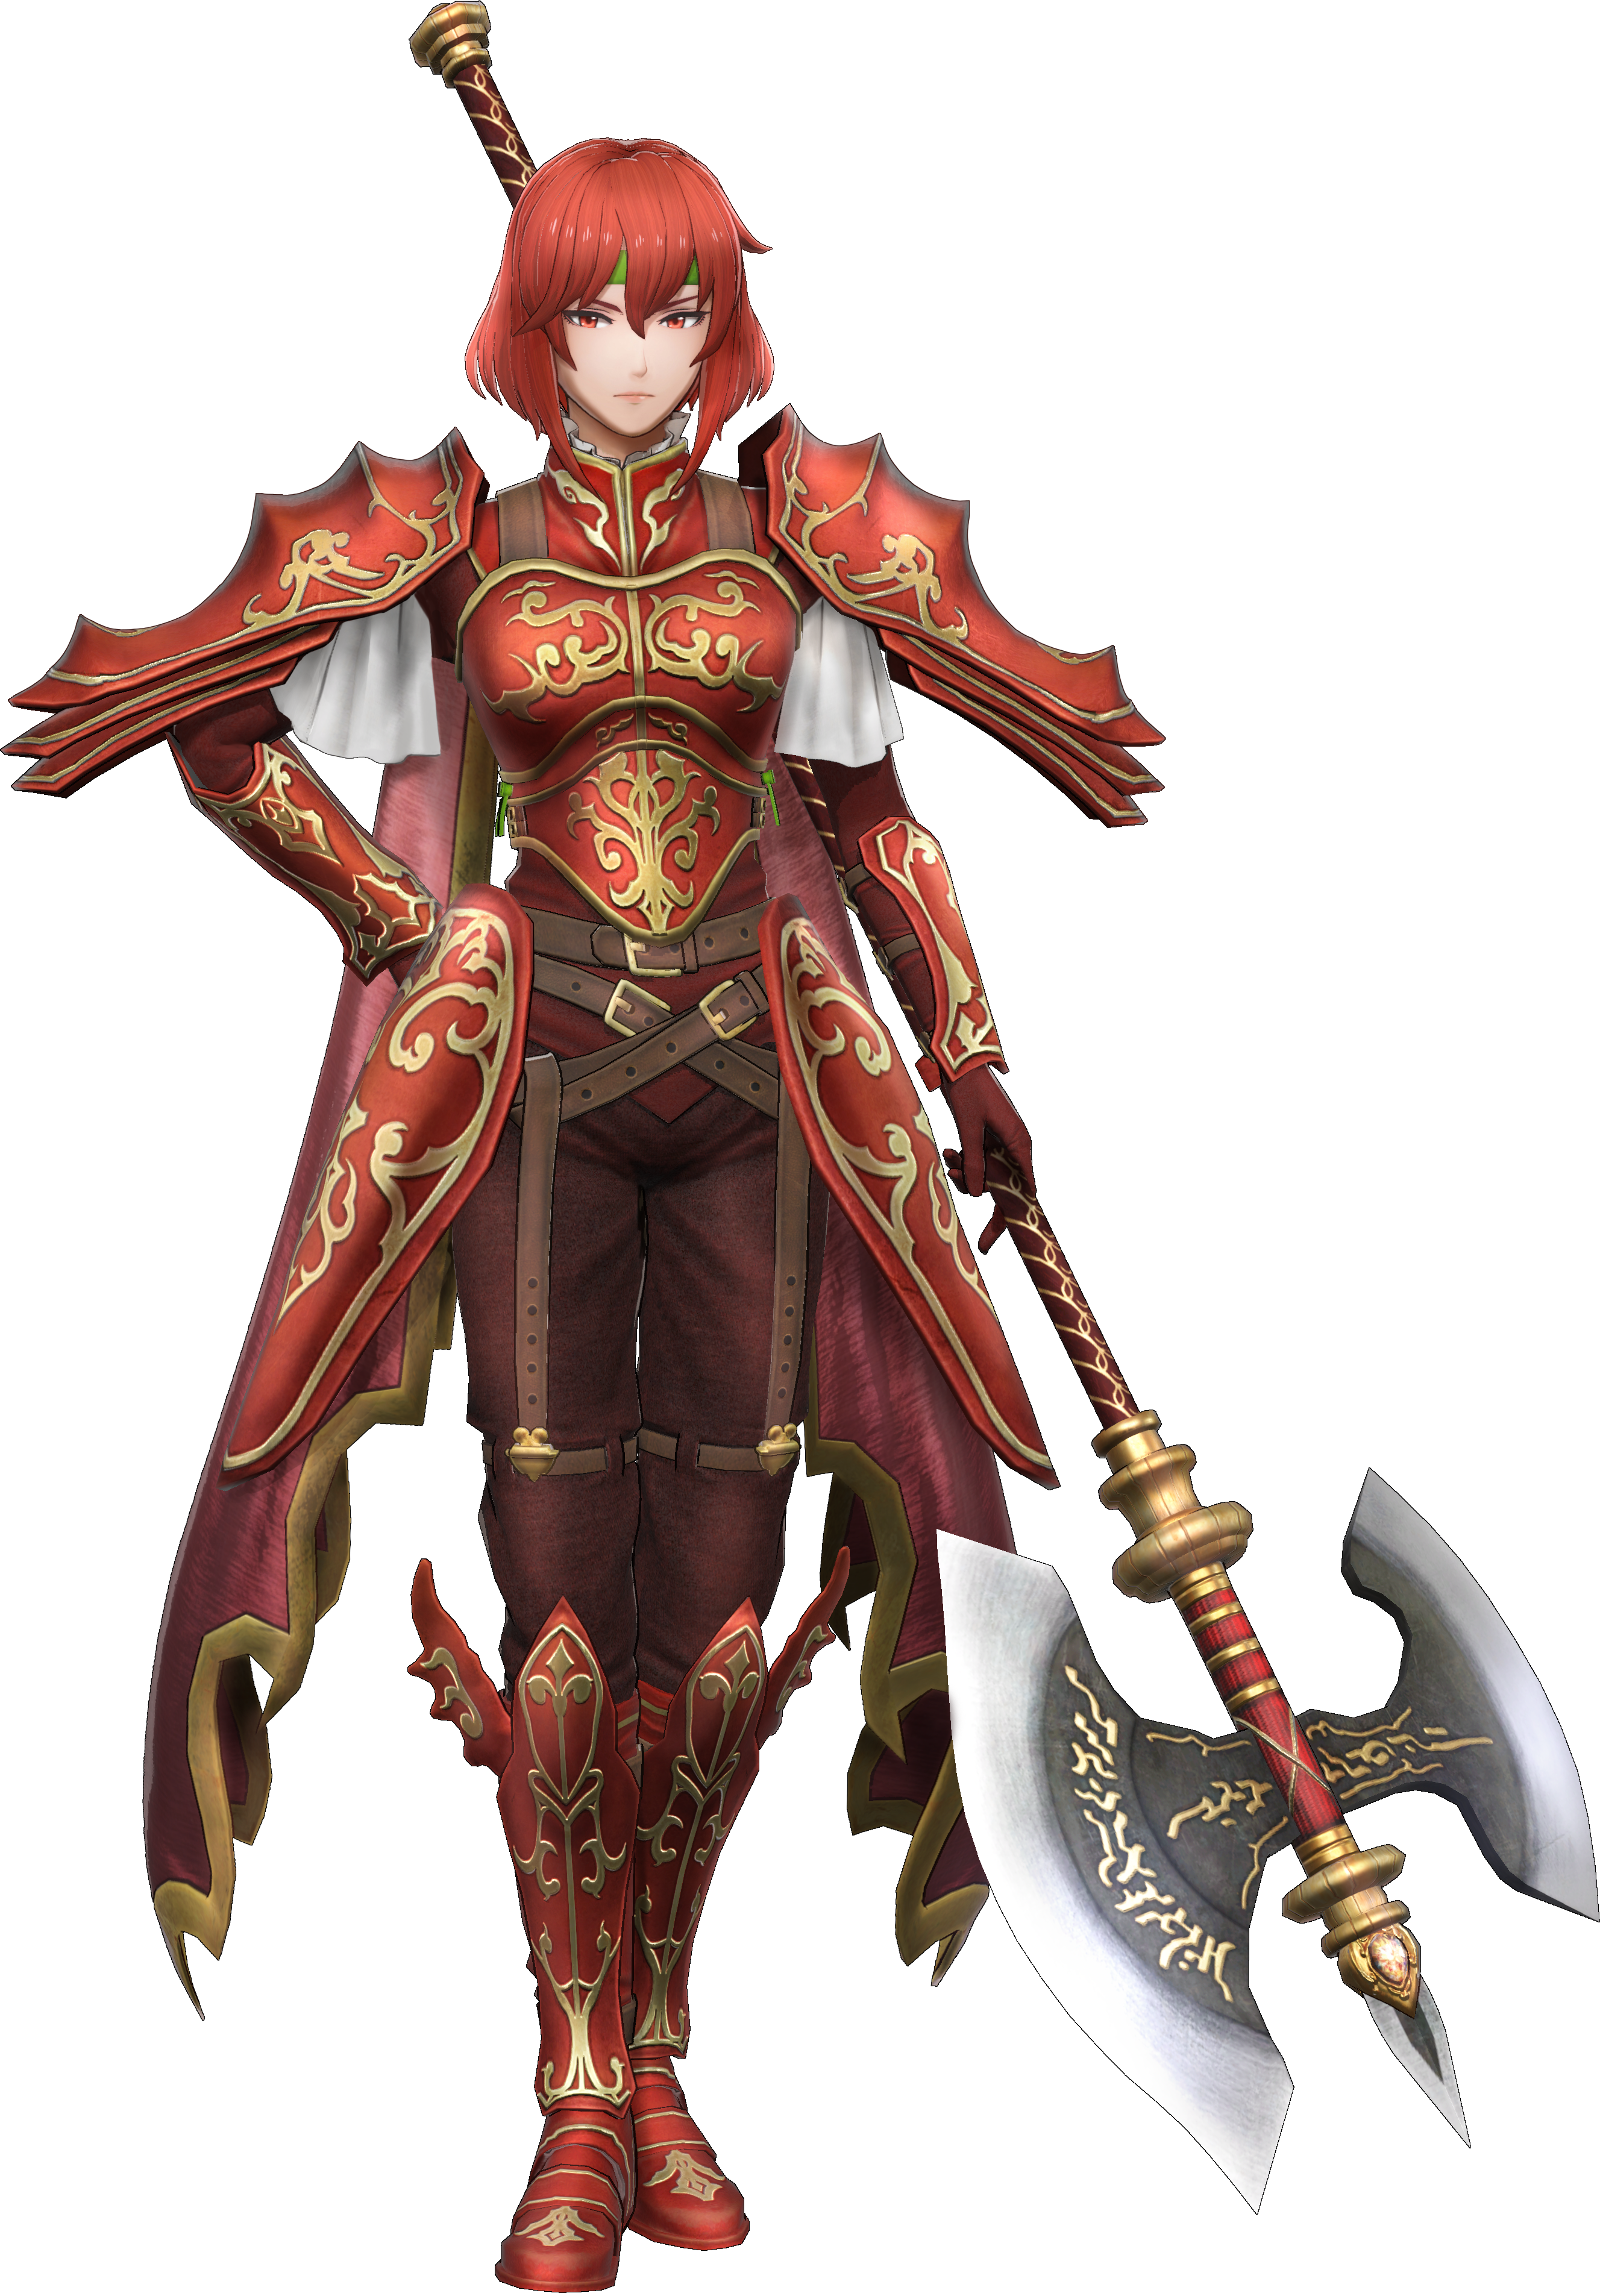 Artwork of Minerva from Fire Emblem: Warriors. An intense-looking woman with ornate red armor and chin-length bright red hair looks at the camera. In one hand is a long-handled battleaxe.